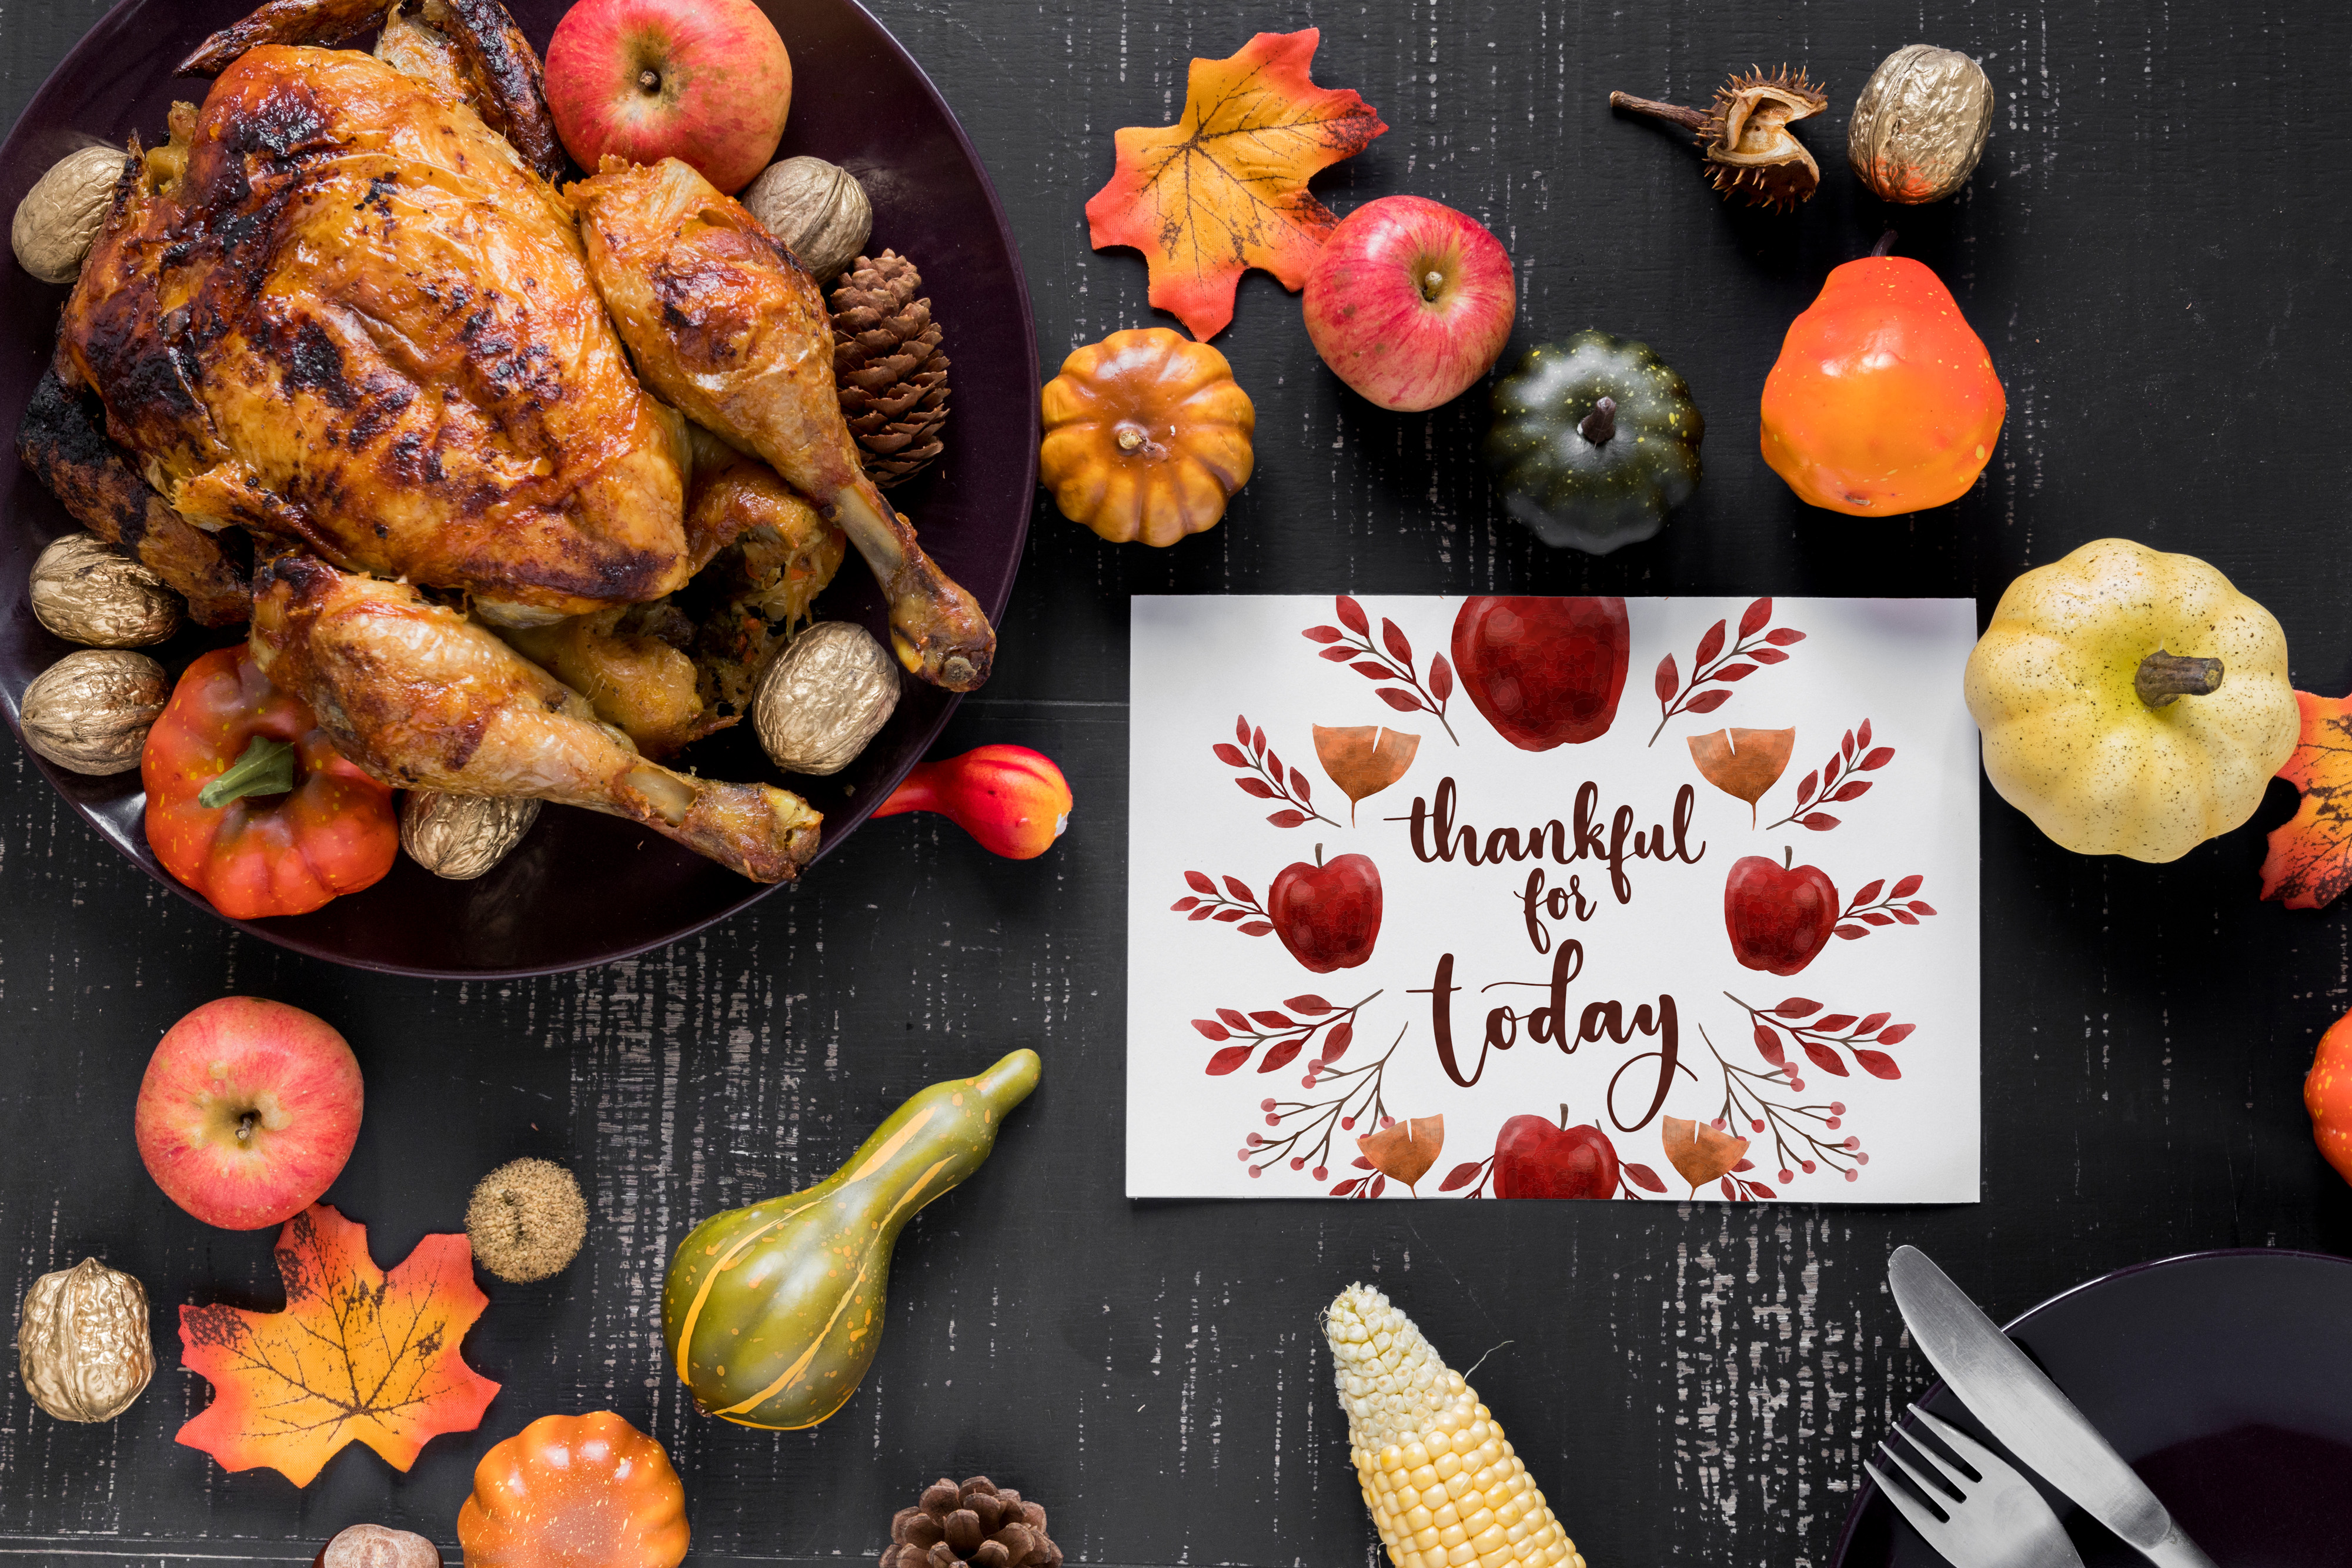 Thanksgiving holiday ideas from heart of the desert pistachios and wine